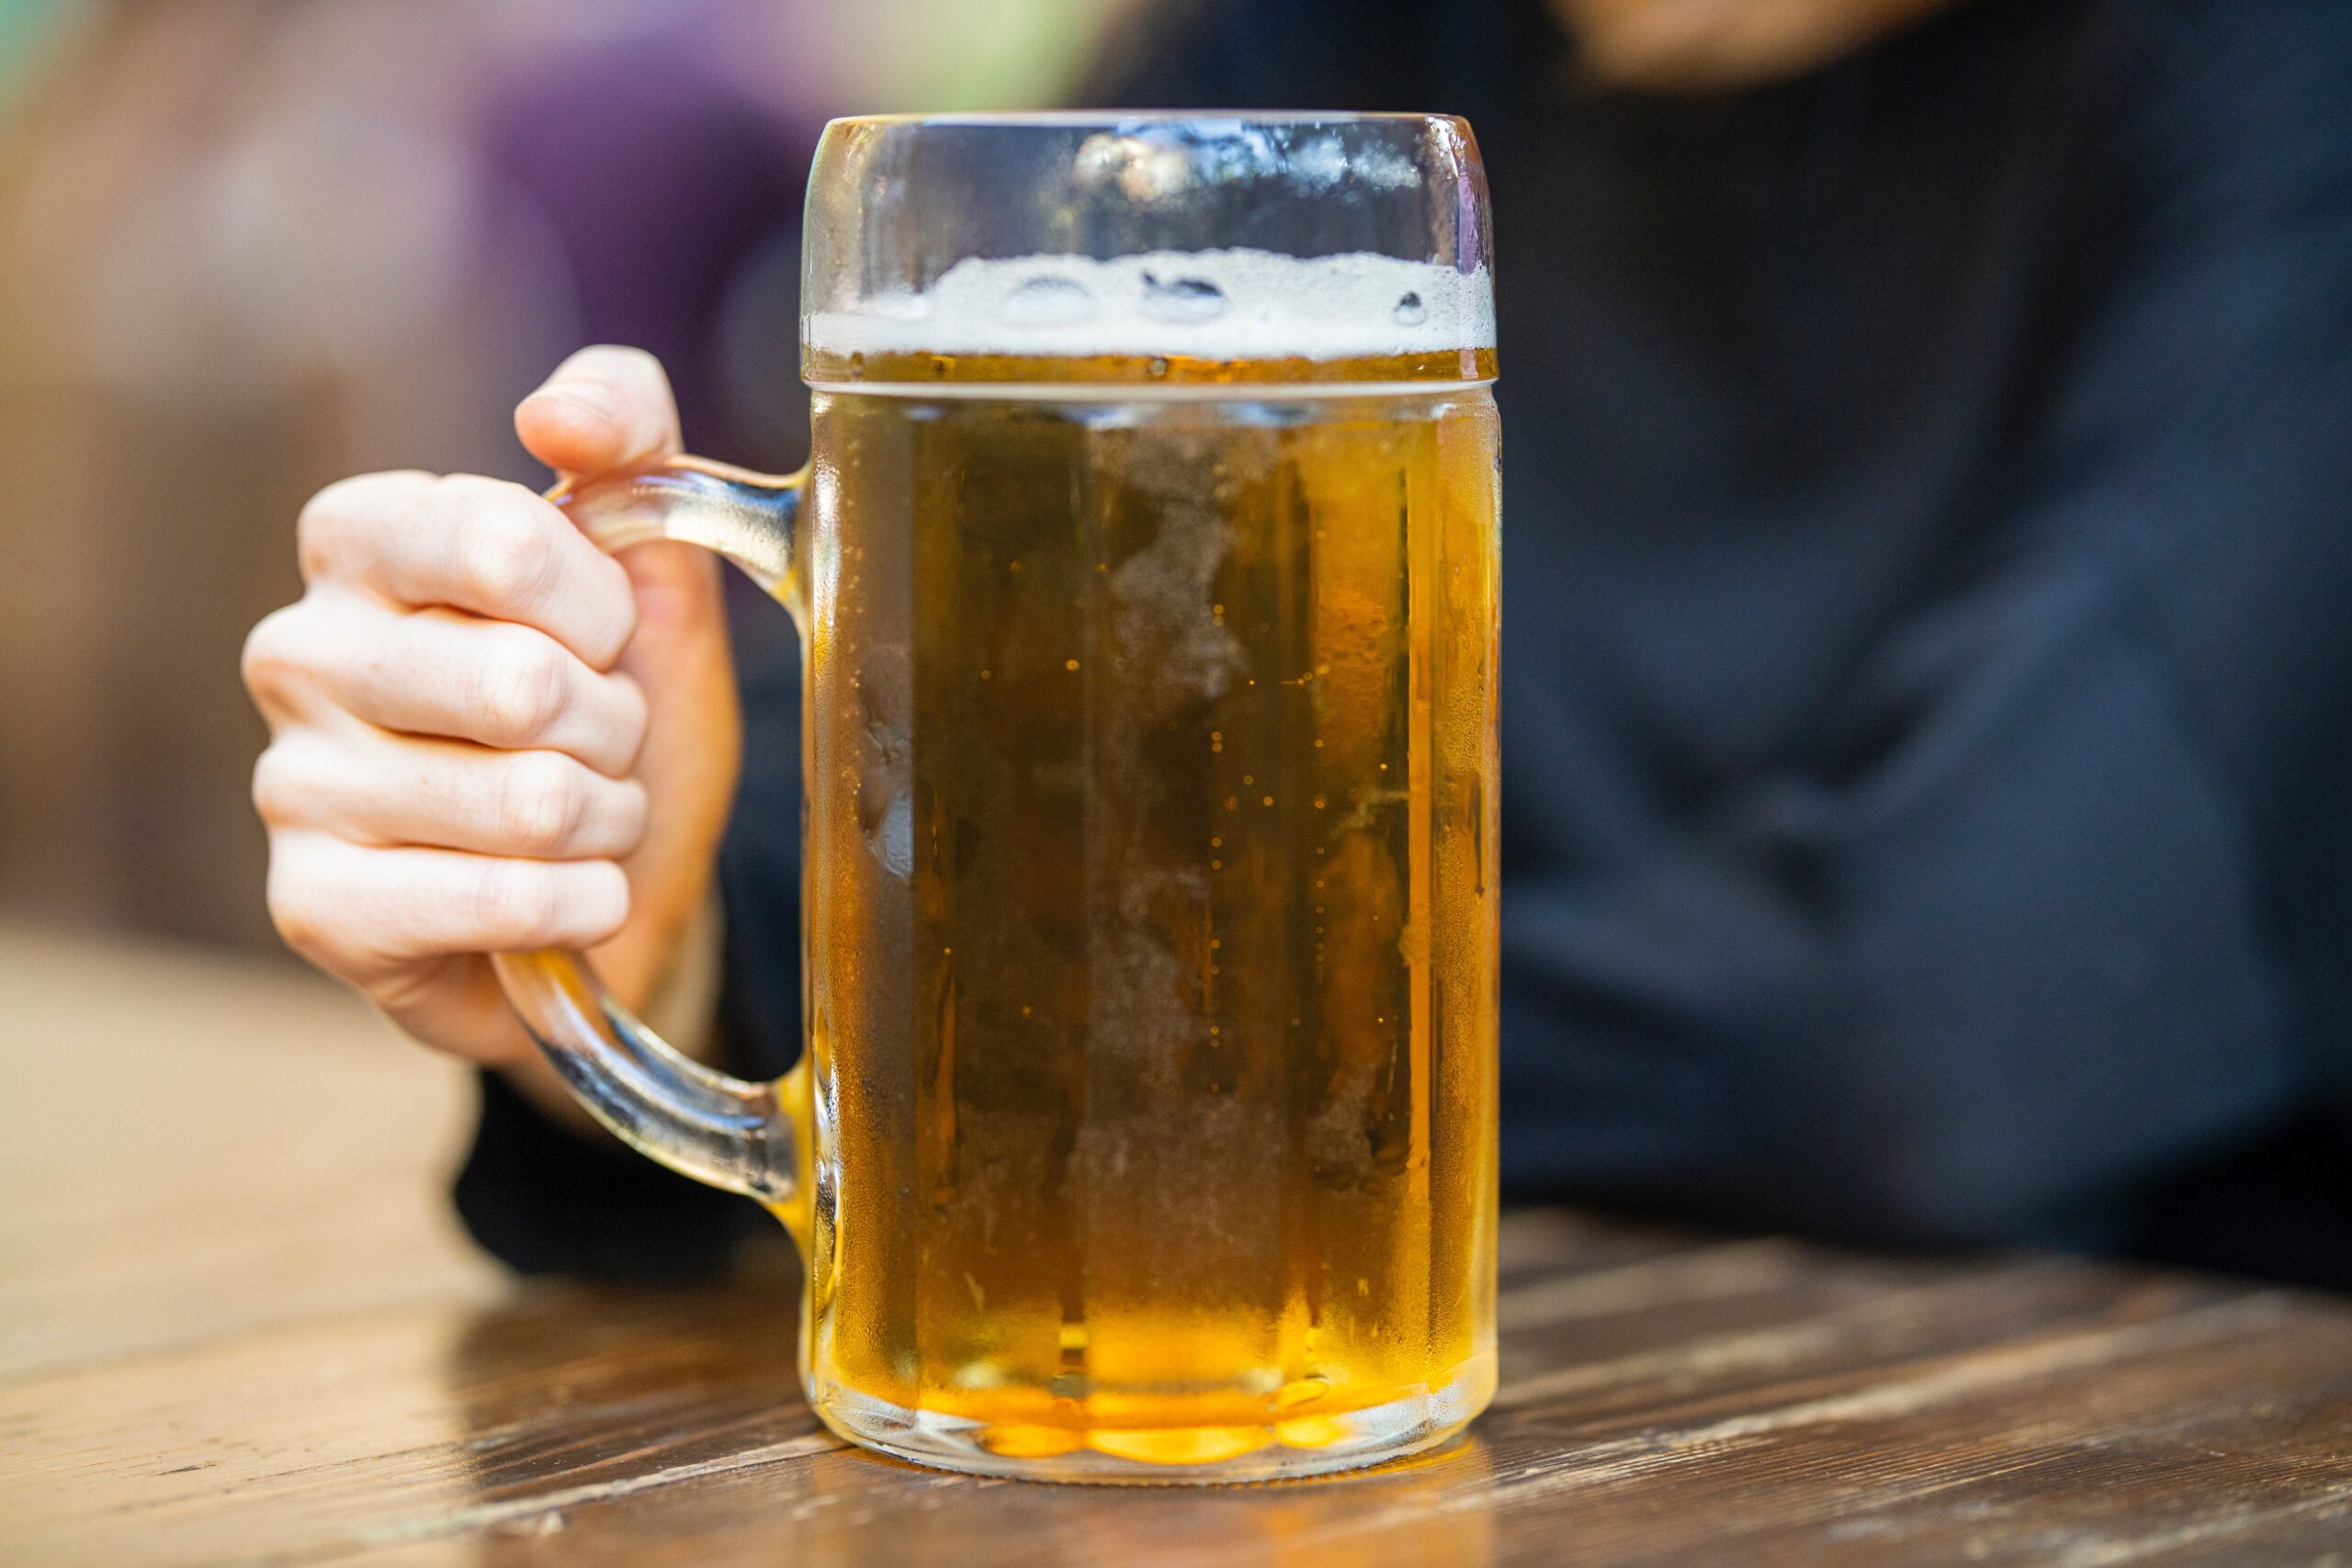 Clear Glass Mug Filled with Beer